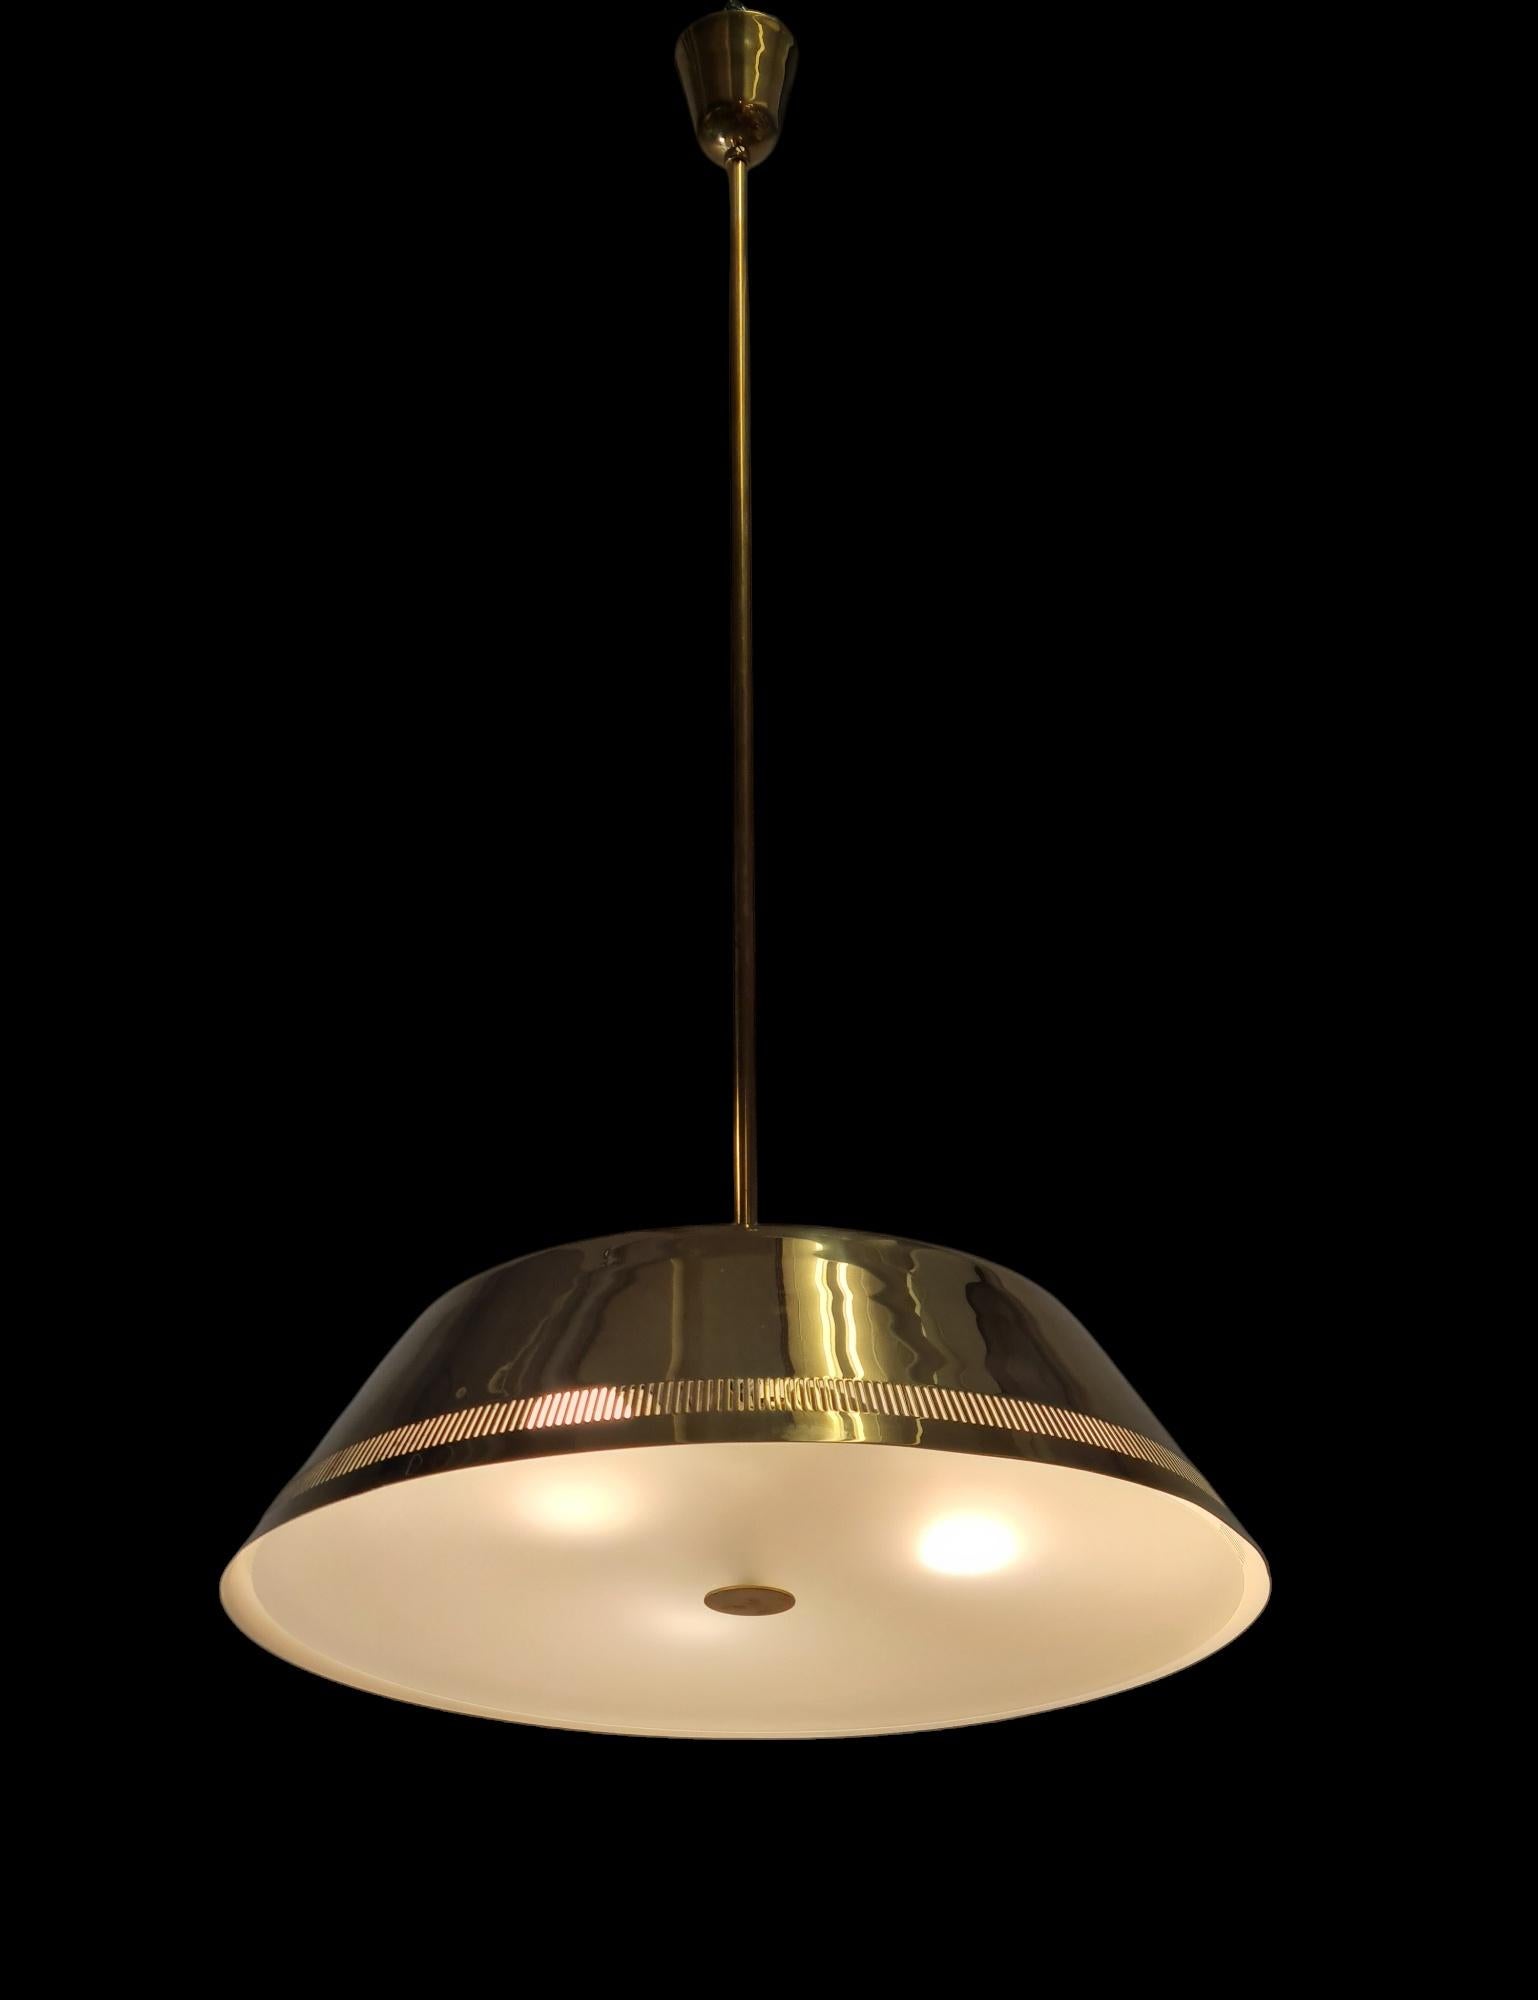 A beautiful and quite a sizeable Paavo Tynell ceiling pendant model no. 82500 for Idman from the 1950s. Because of its size, the lamp suits large rooms, living rooms and other spacious places. The lamp is quite simple and minimalistic in design.